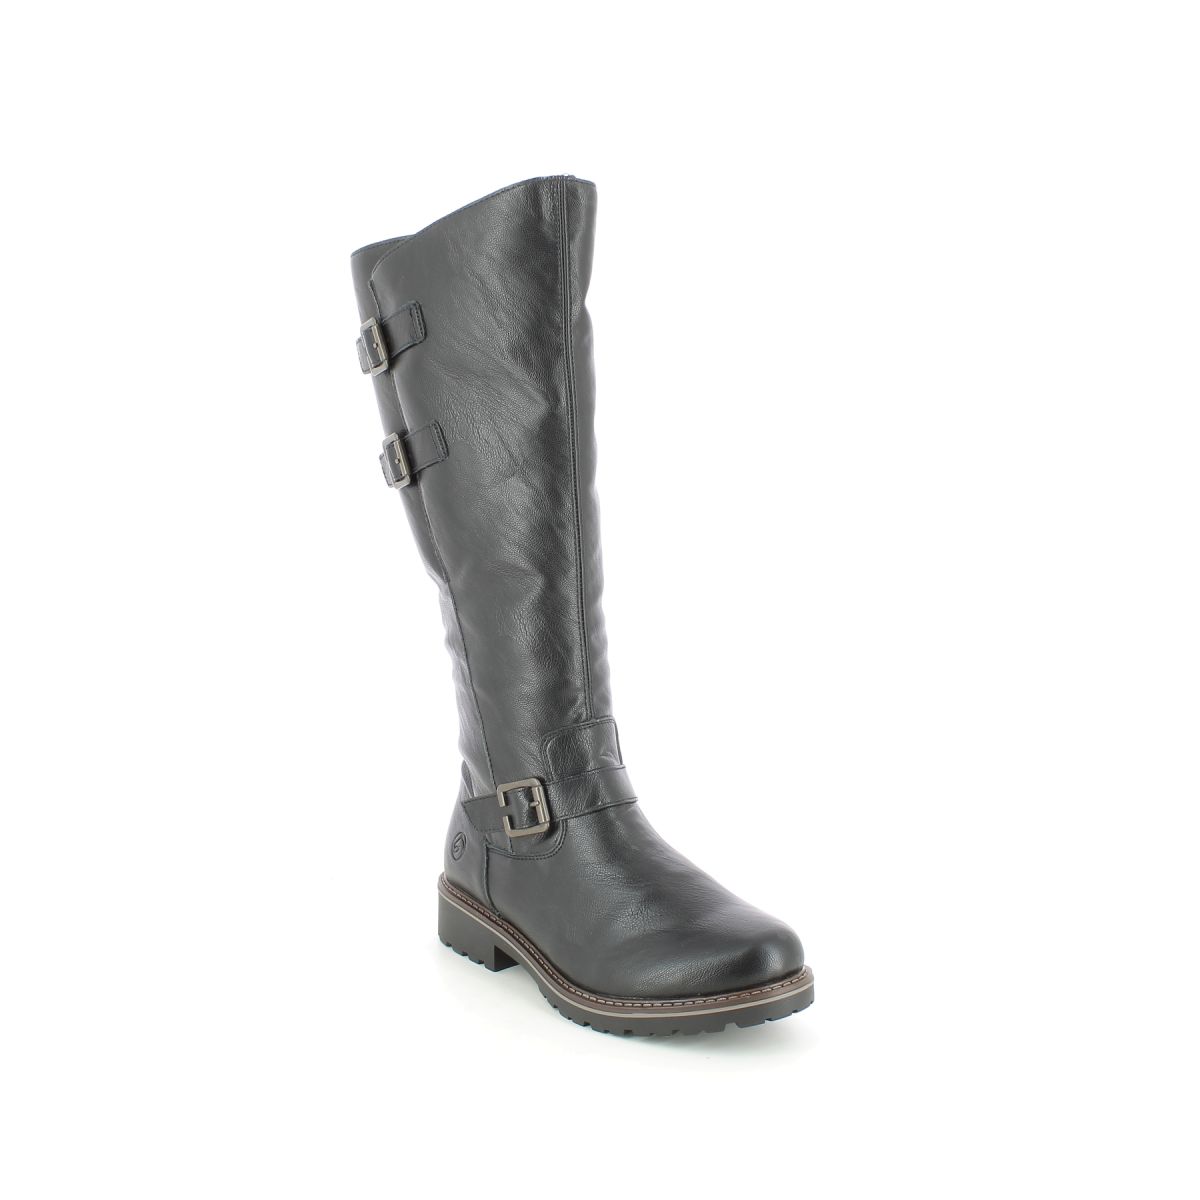 Remonte Indah Shearling Black Womens Knee-High Boots R6590-01 In Size 40 In Plain Black